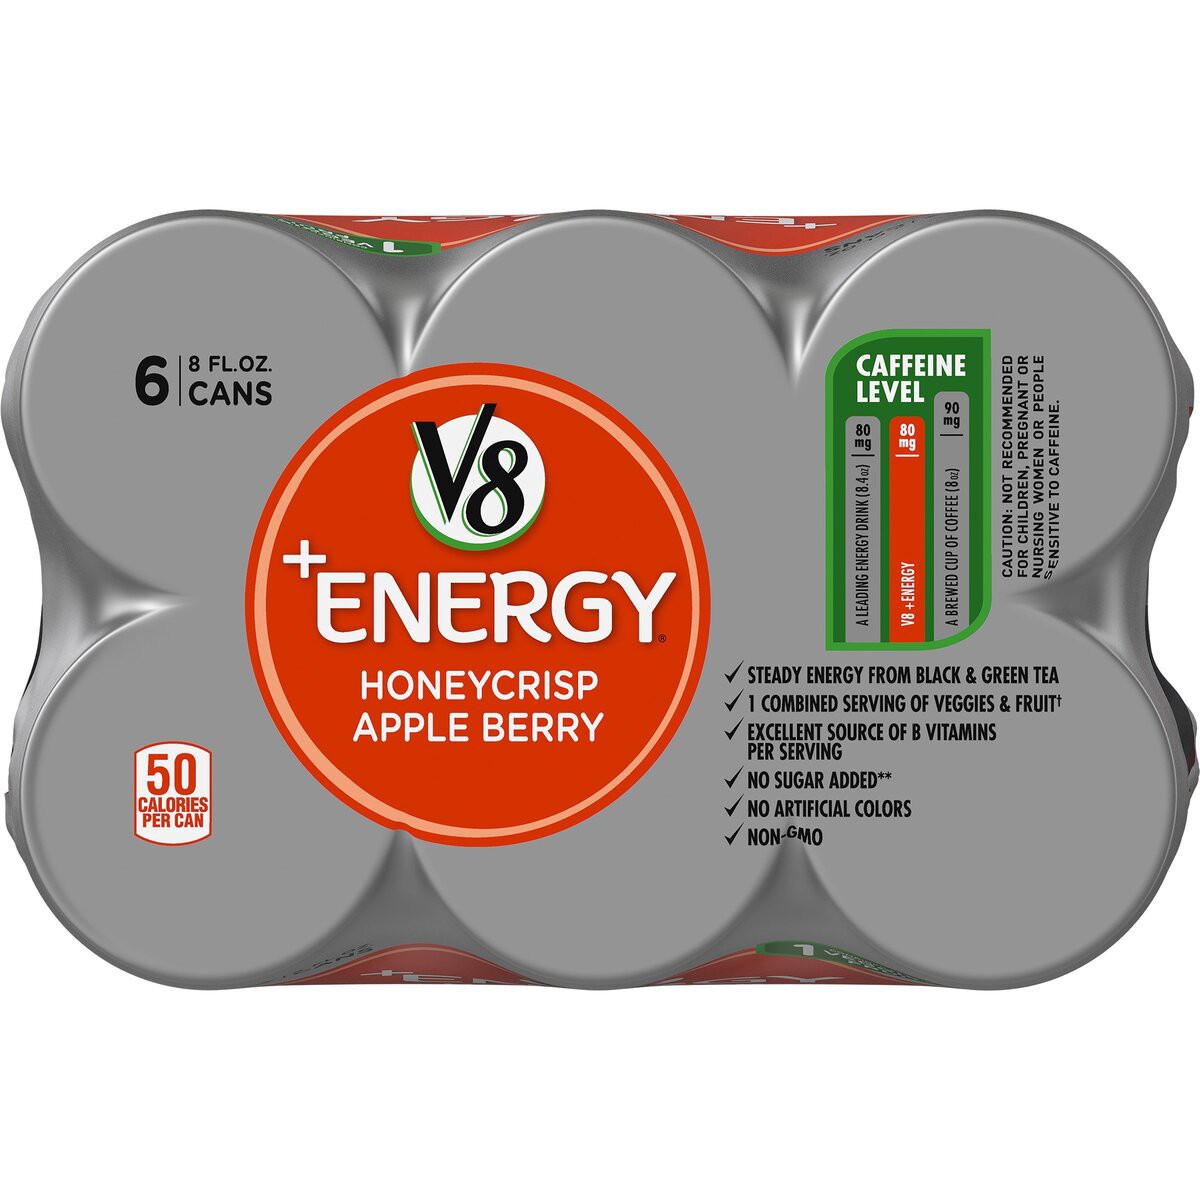 slide 5 of 8, V8 +Energy, Healthy Energy Drink, Natural Energy from Tea, Honeycrisp Apple Berry, 8 Ounce Can (Pack of 6), 48 oz